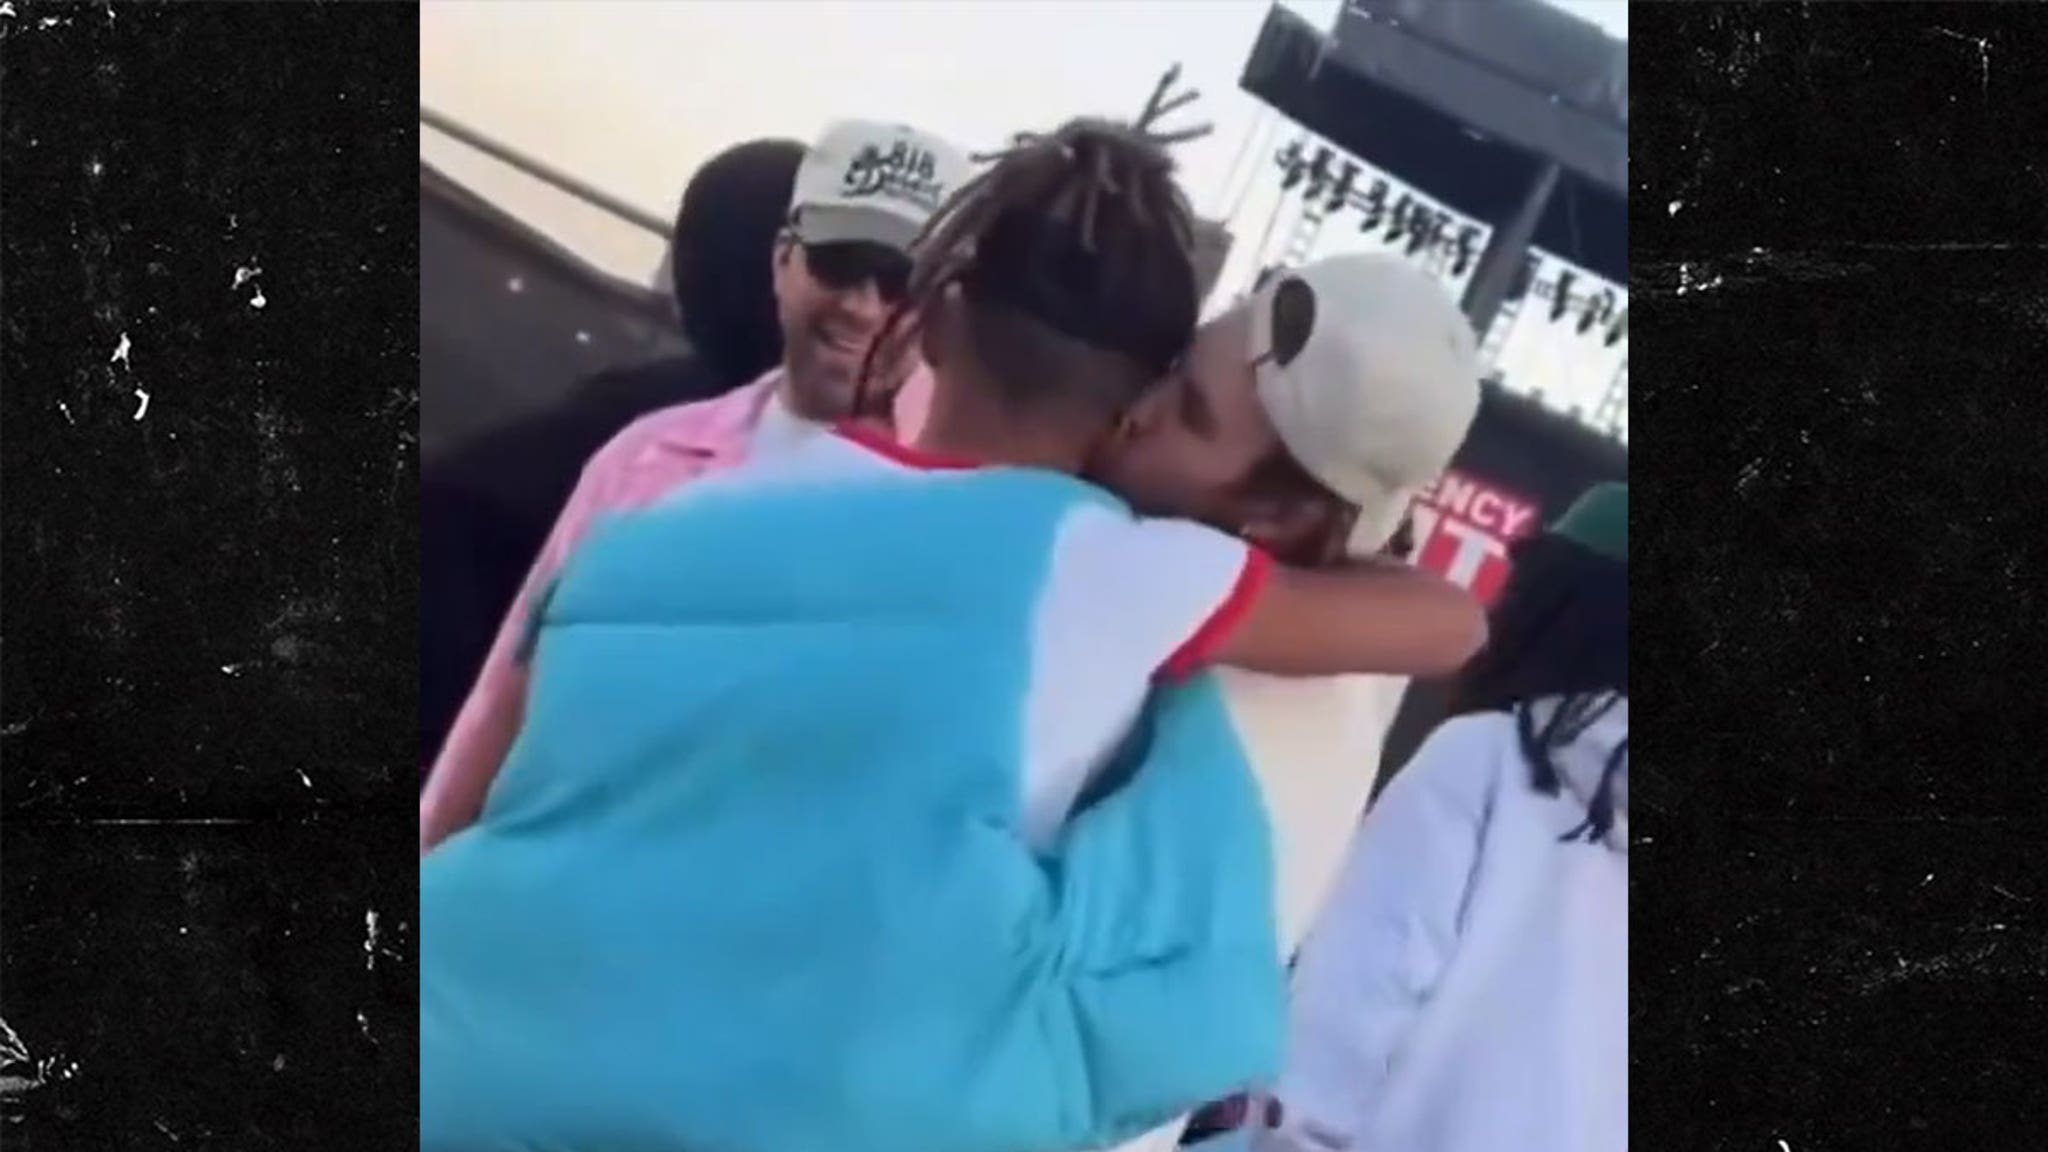 Justin Bieber and Jaden Smith hang out at Coachella and share a kiss